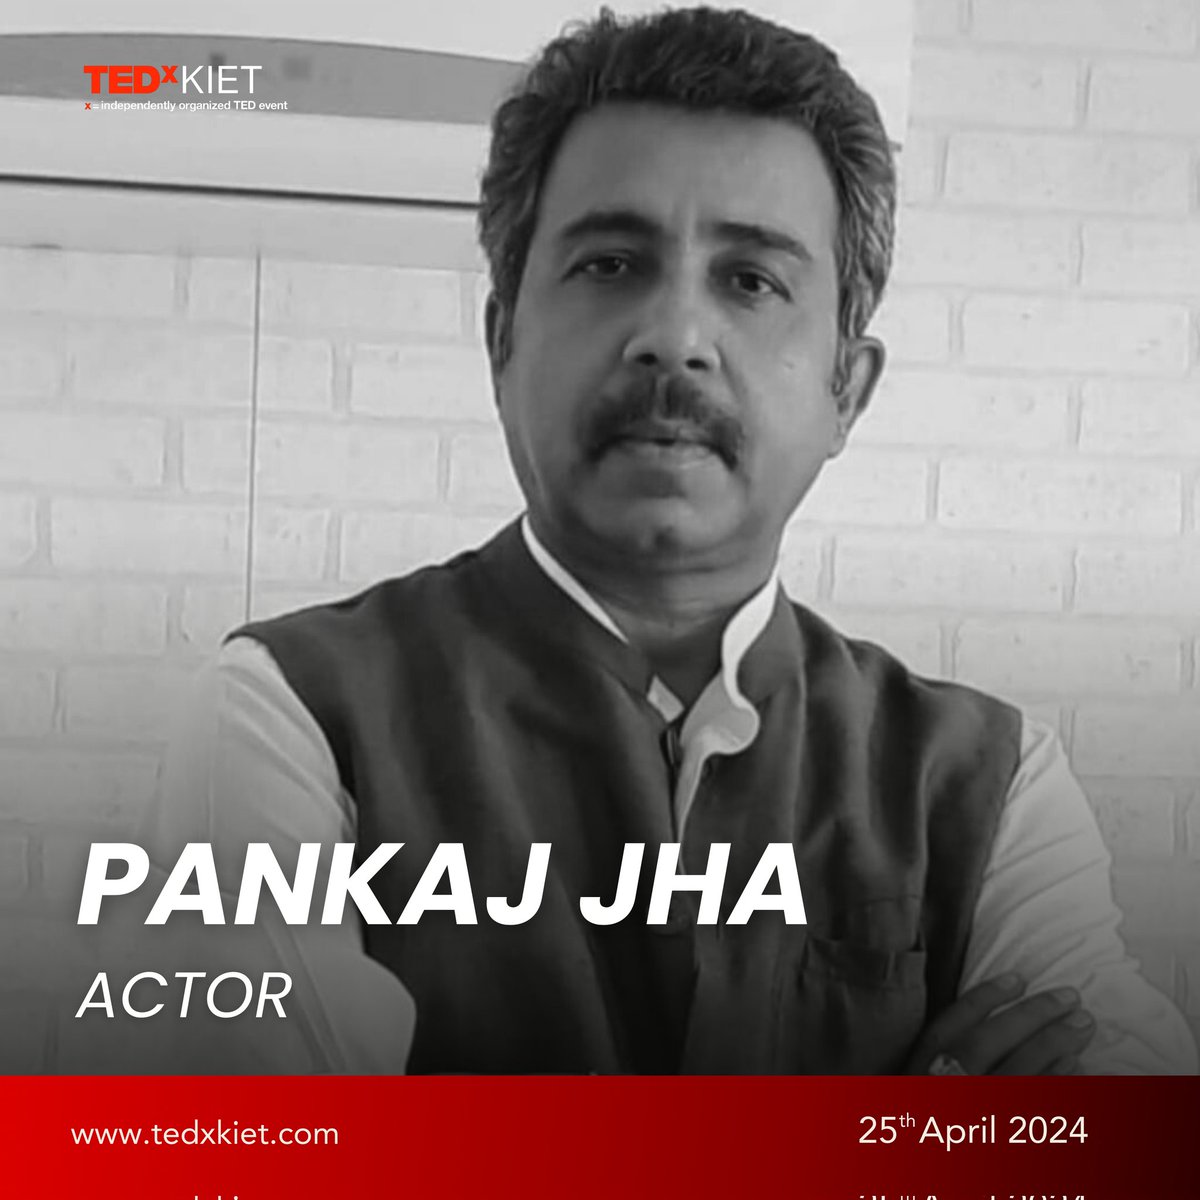 Meet Pankaj Jha: actor, painter, poet, and photographer! Known for roles in 'Panchayat', 'Mirzapur', and acclaimed films like 'BlackFriday'. With six successful solo exhibitions and a passion for poetry, he's ready to inspire at TEDxKIET’24 on April 25th, 2024!